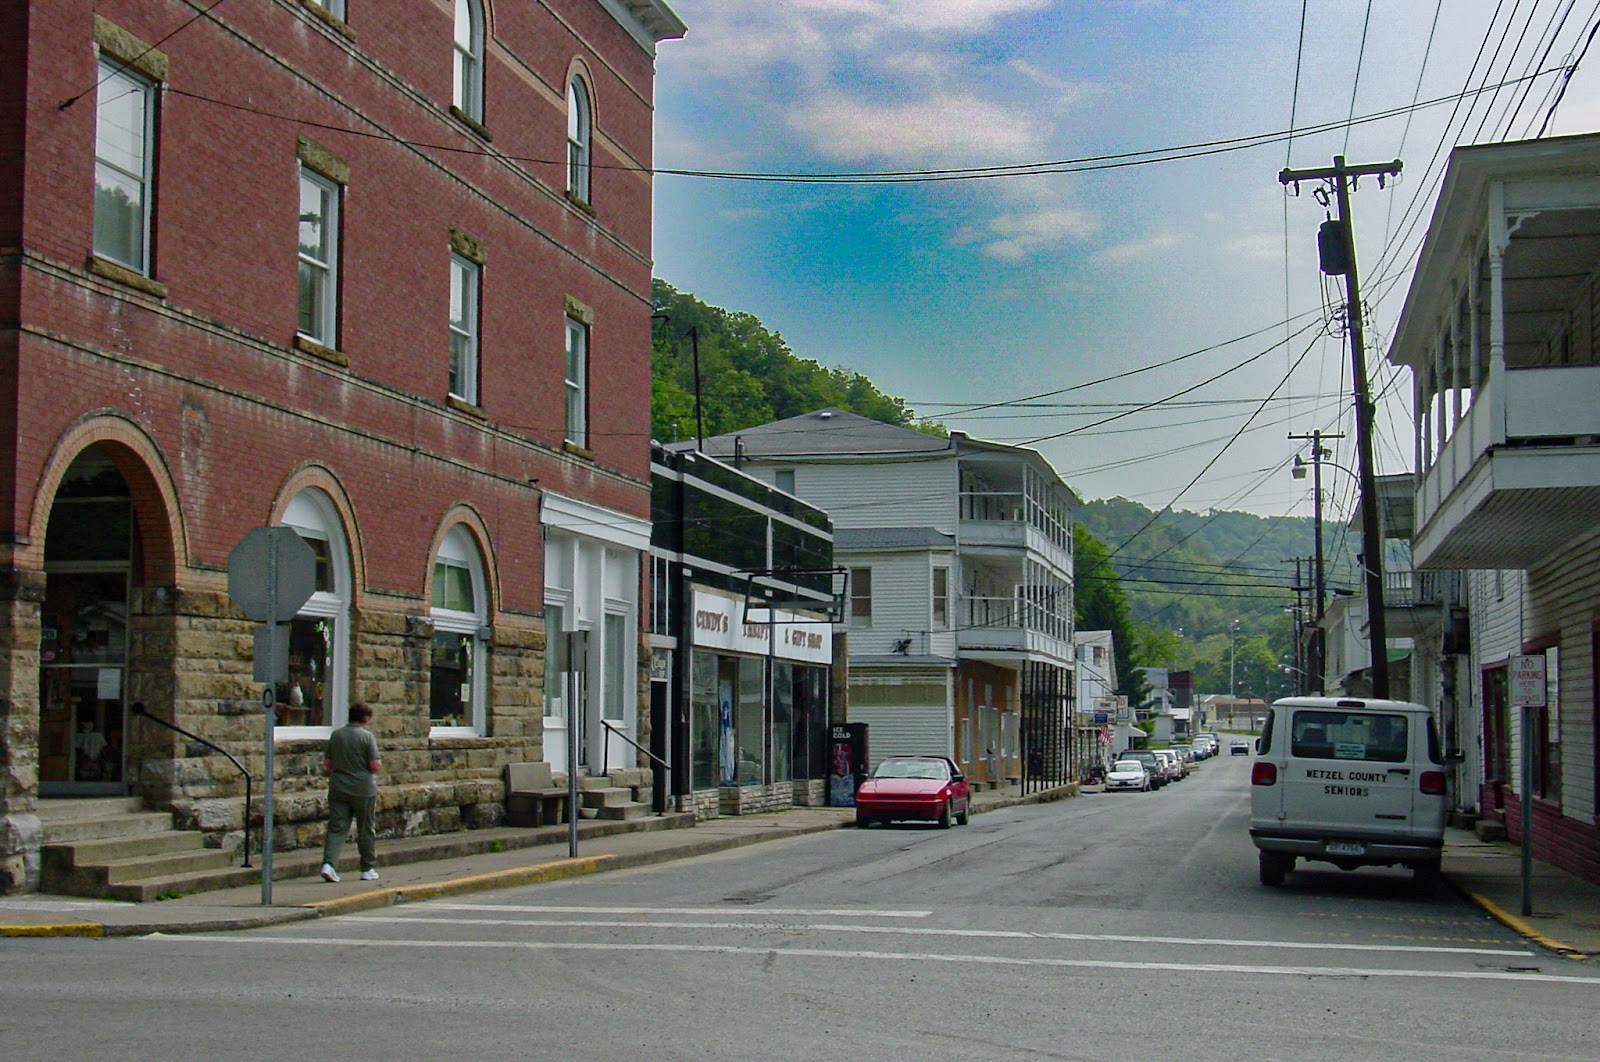 A small town with red brick 3-story building on a 2-lane highway. 